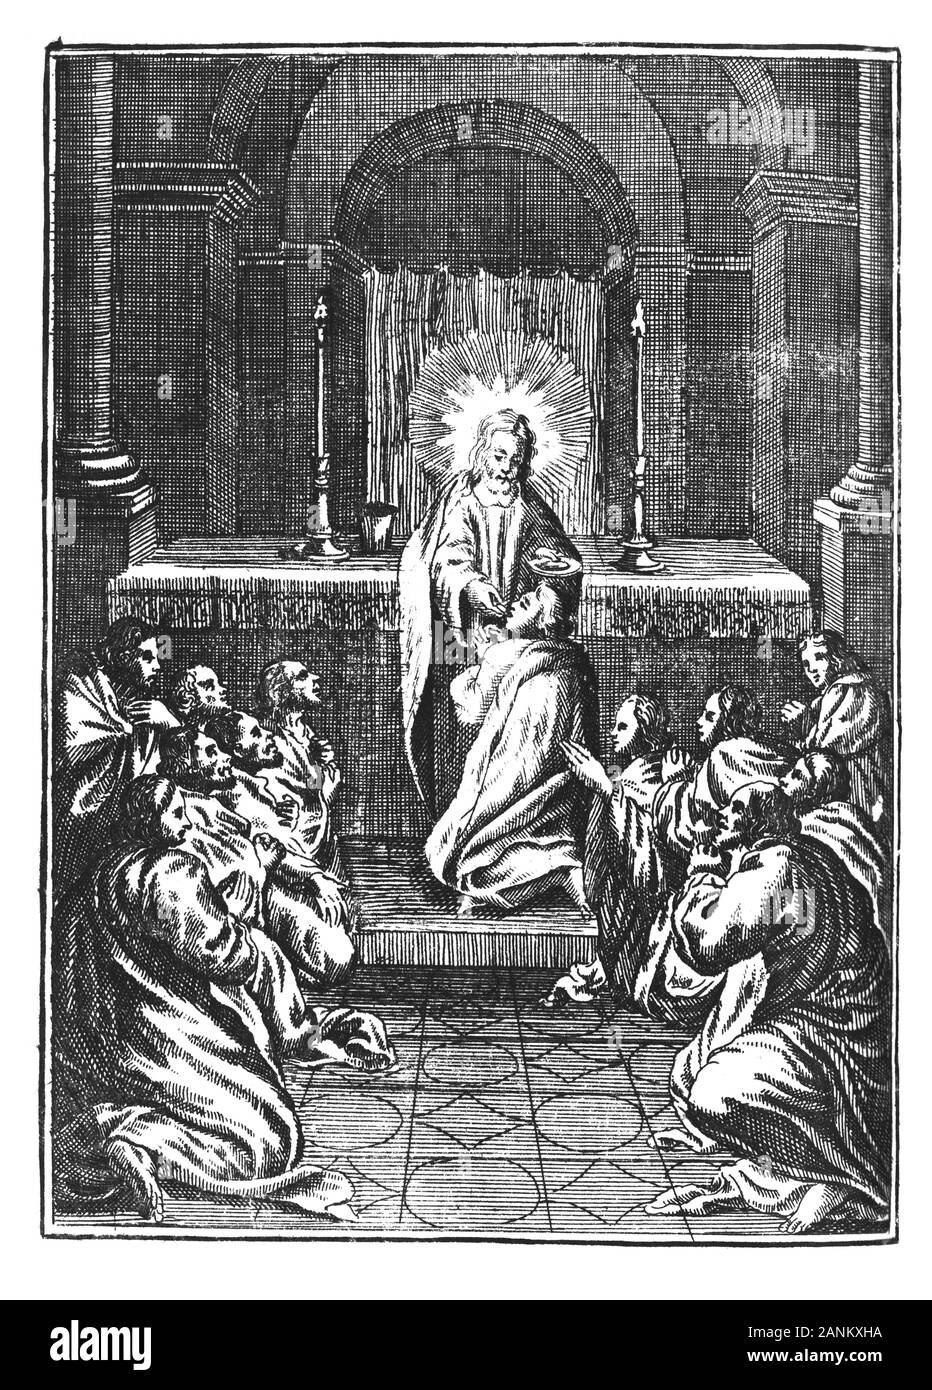 Antique vintage religious engraving or drawing of Jesus giving wafer to twelve praying men or apostles or disciples in church. Illustration from Book Die Betrubte Und noch Ihrem Beliebten..., Austrian Empire,1716. Artist is unknown. Stock Photo